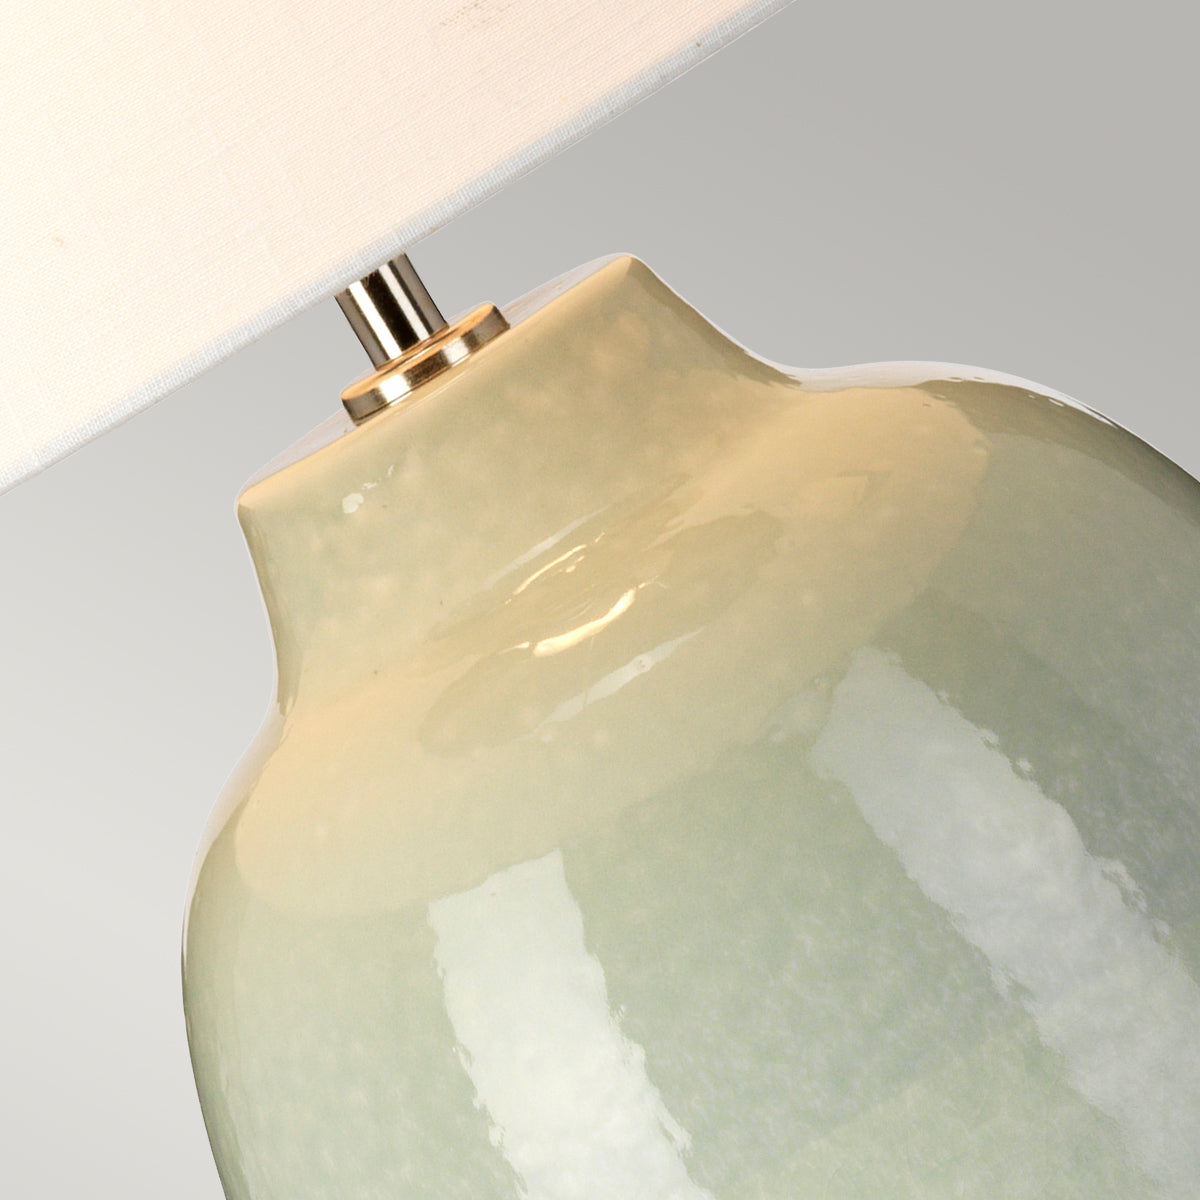 Chelsfield Table Lamp